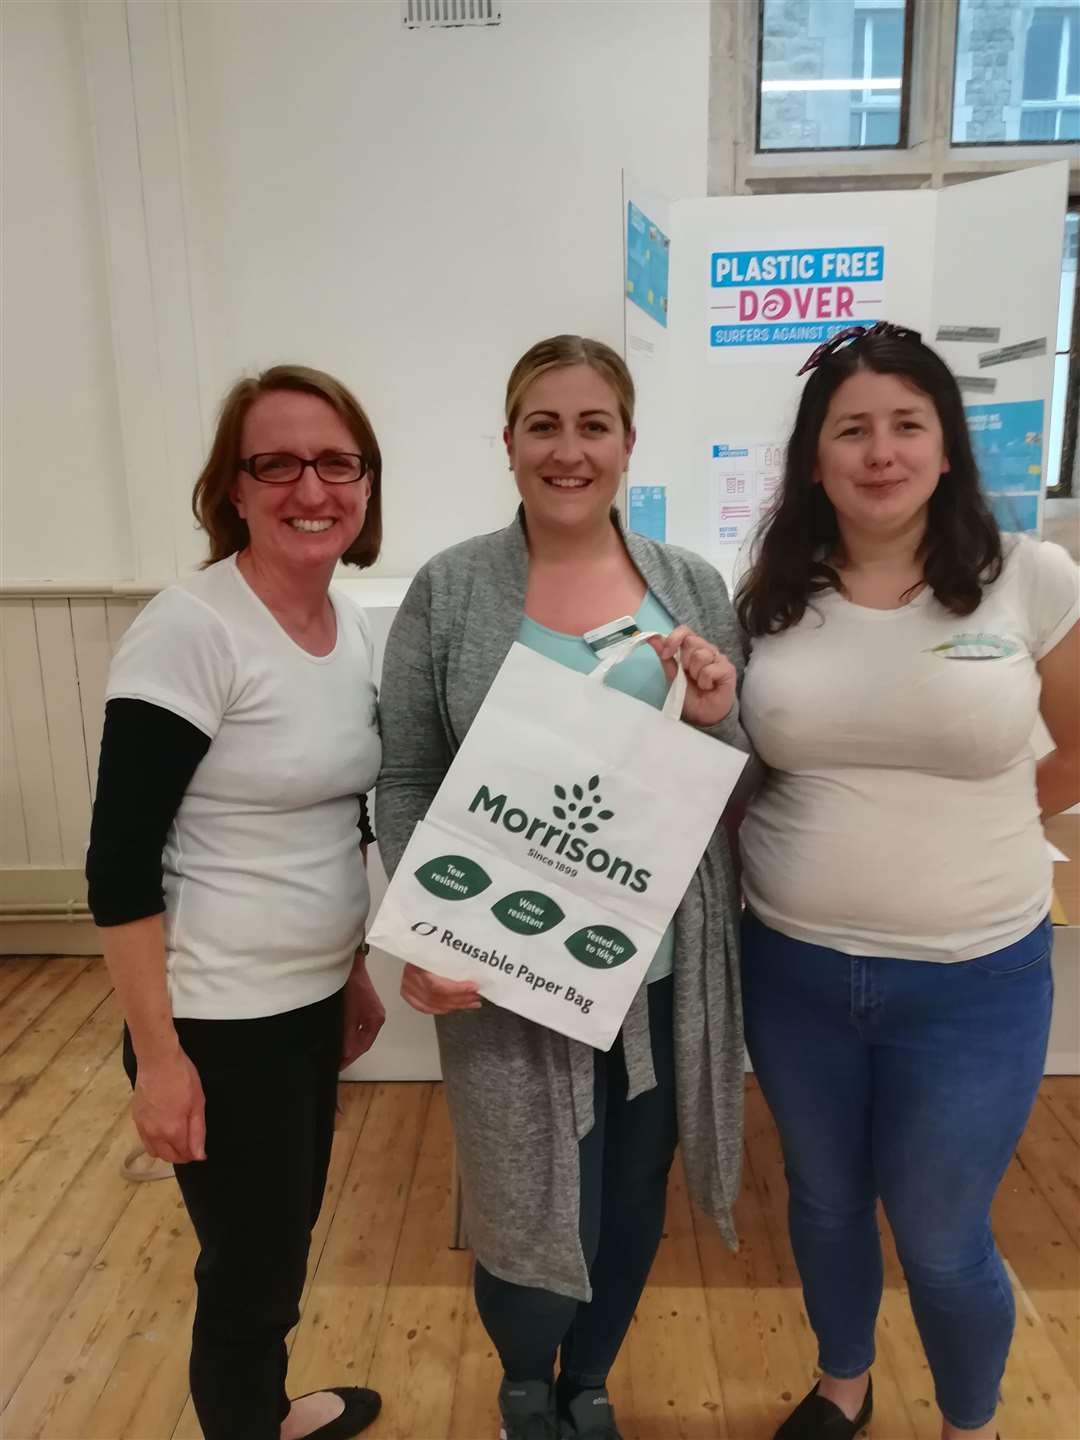 Liz Hayes of Transition Dover with guests Jemma Abbitt and Amy Howie at the Plastic Free Dover business launch